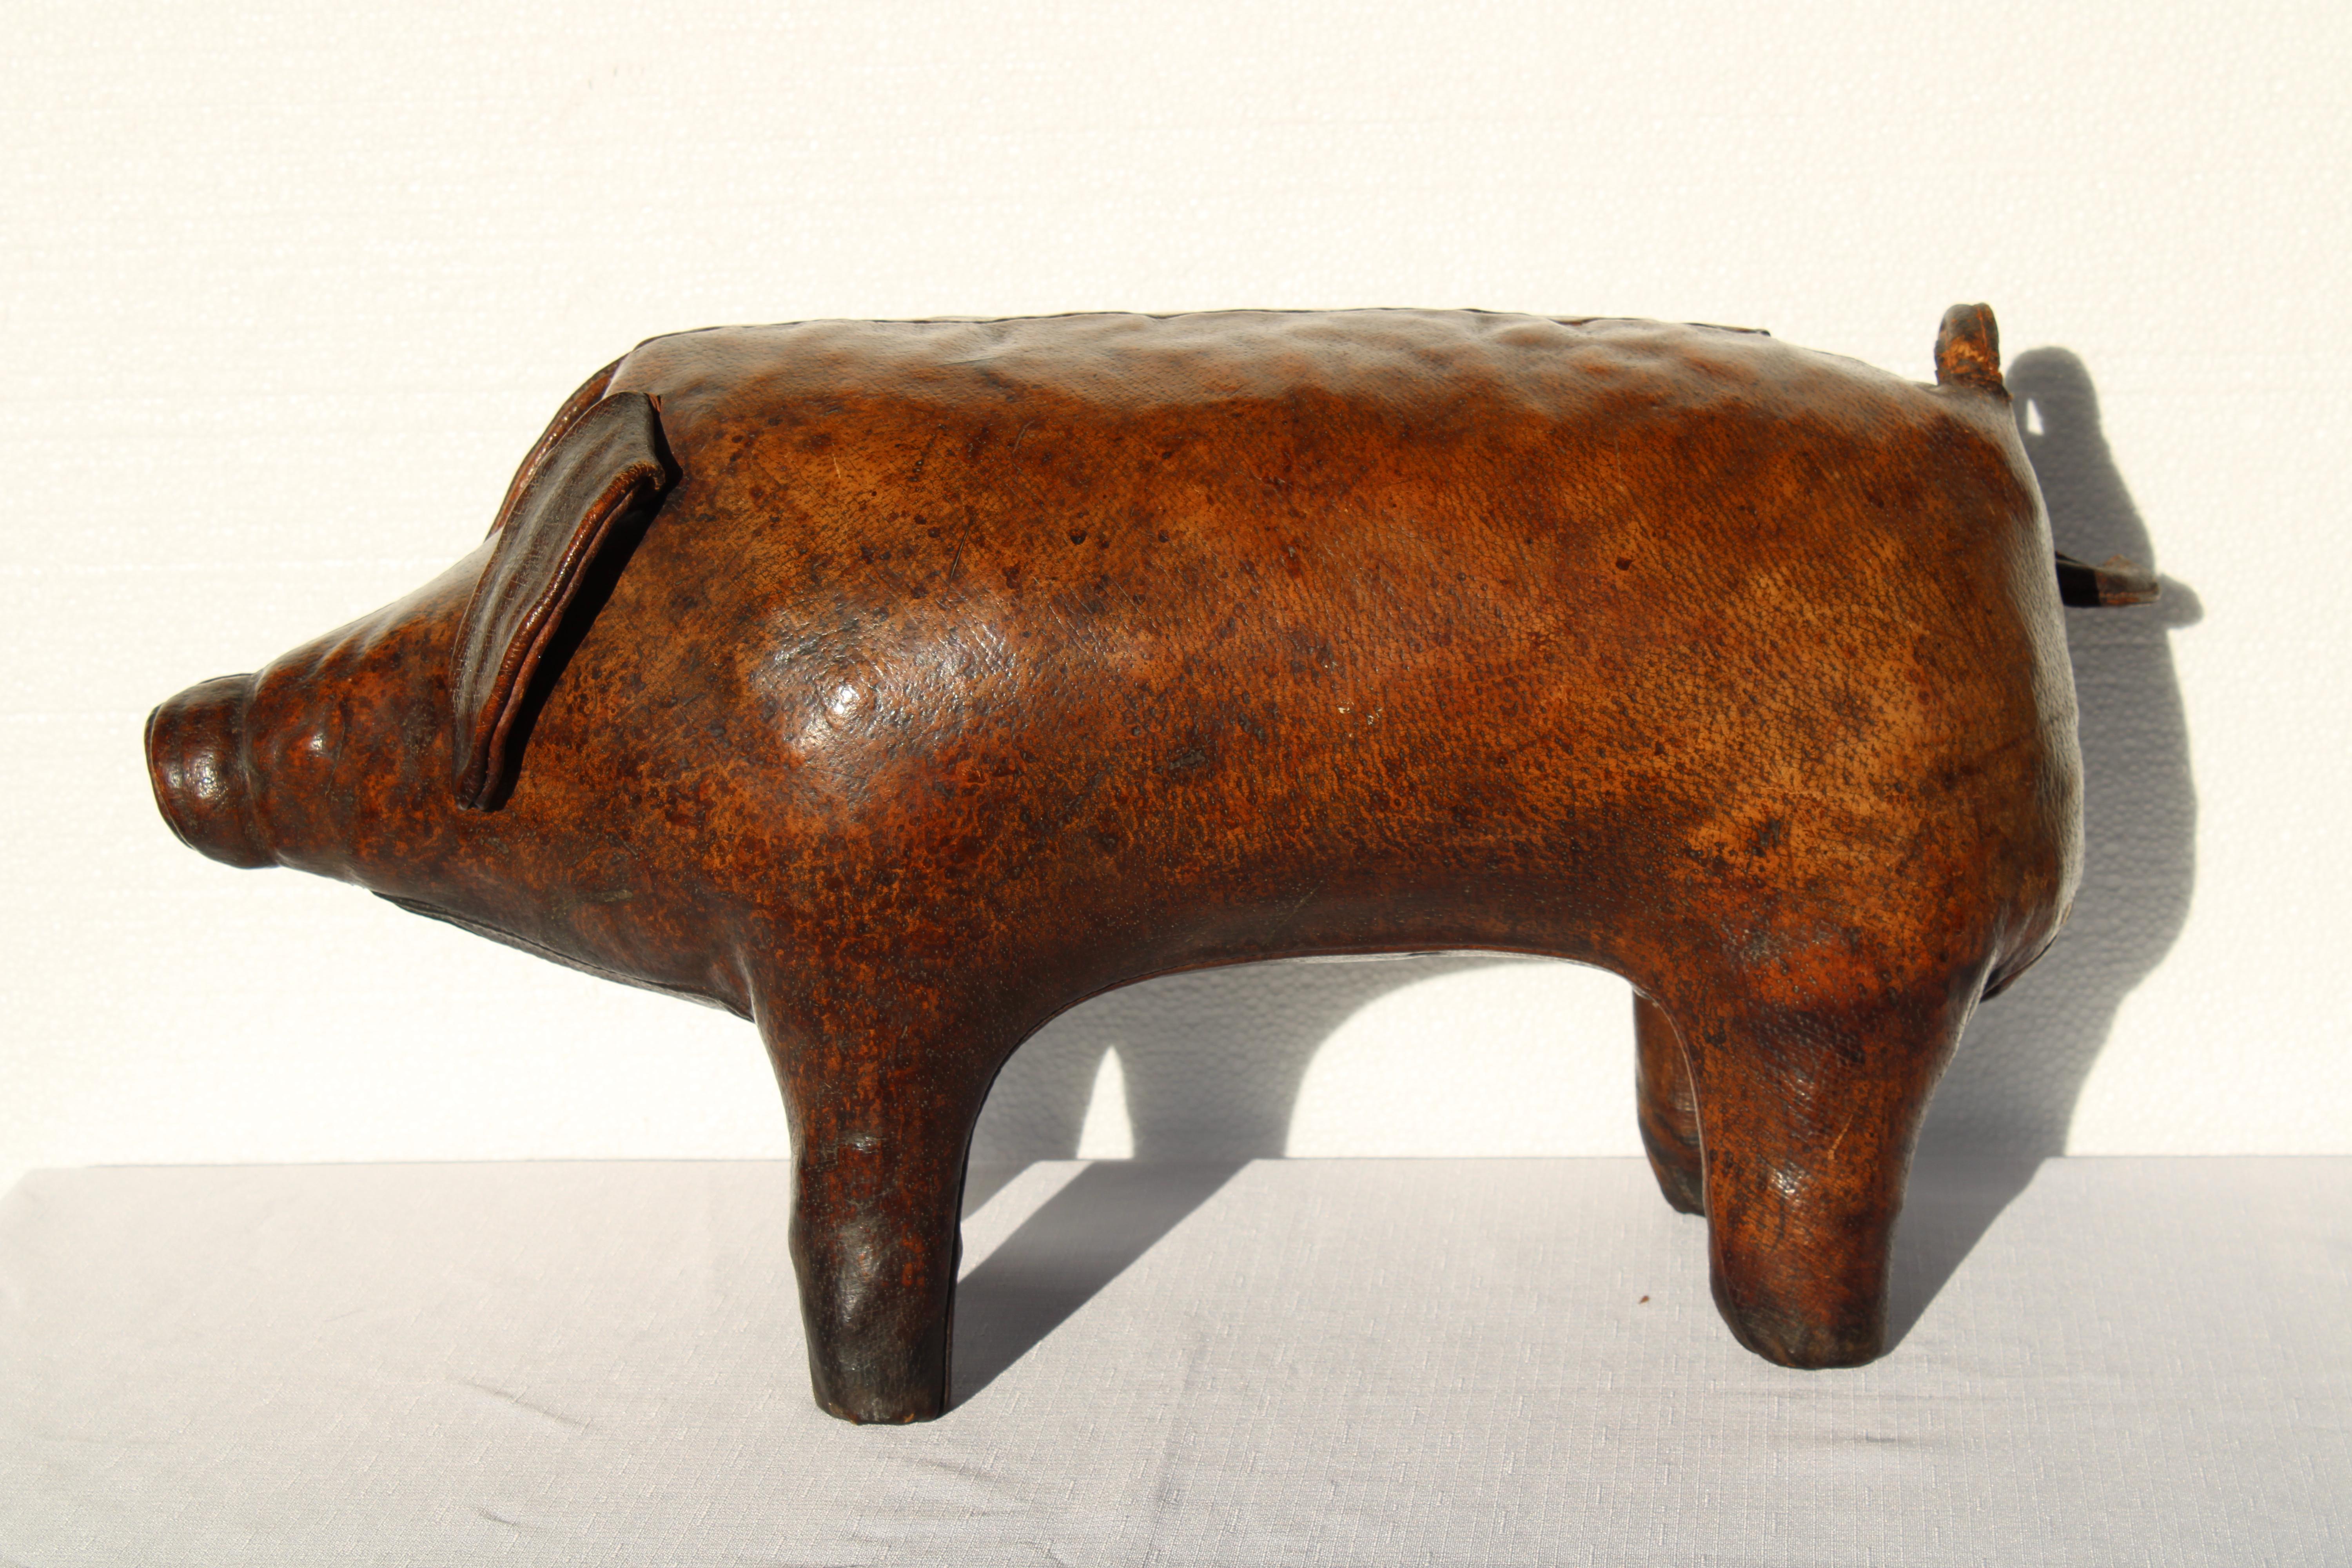 Leather pig ottoman made by Dimitri Omersa, United Kingdom for Abercrombie & Fitch.  Leather tag says Made in England.  Piggy measures 24